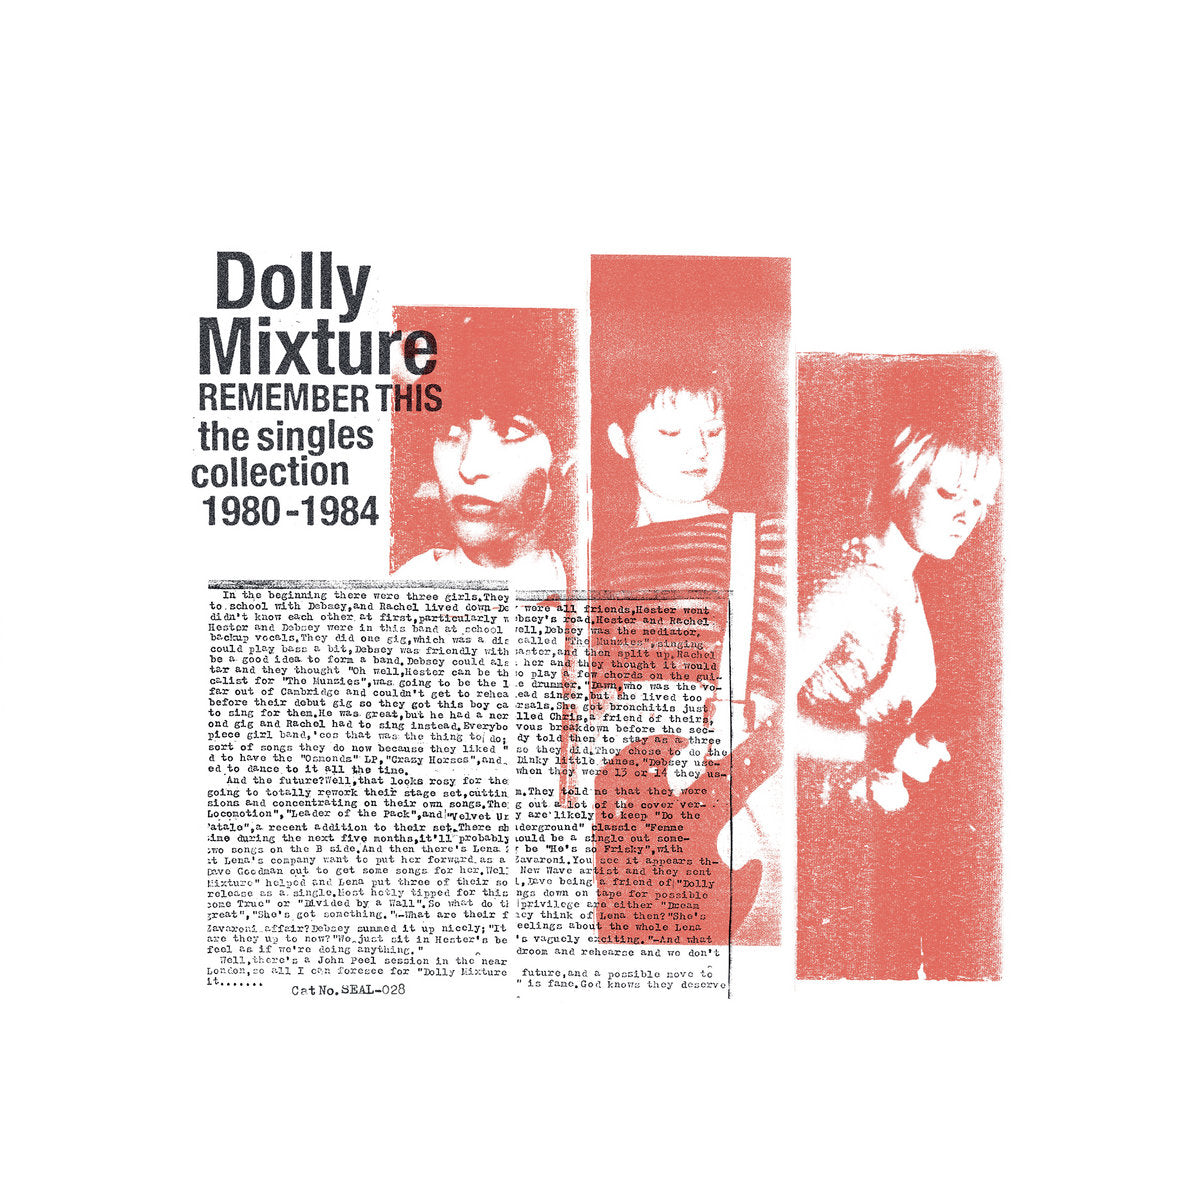 DOLLY MIXTURE - REMEMBER THIS: THE SINGLES COLLECTION 1980-1984 Vinyl LP